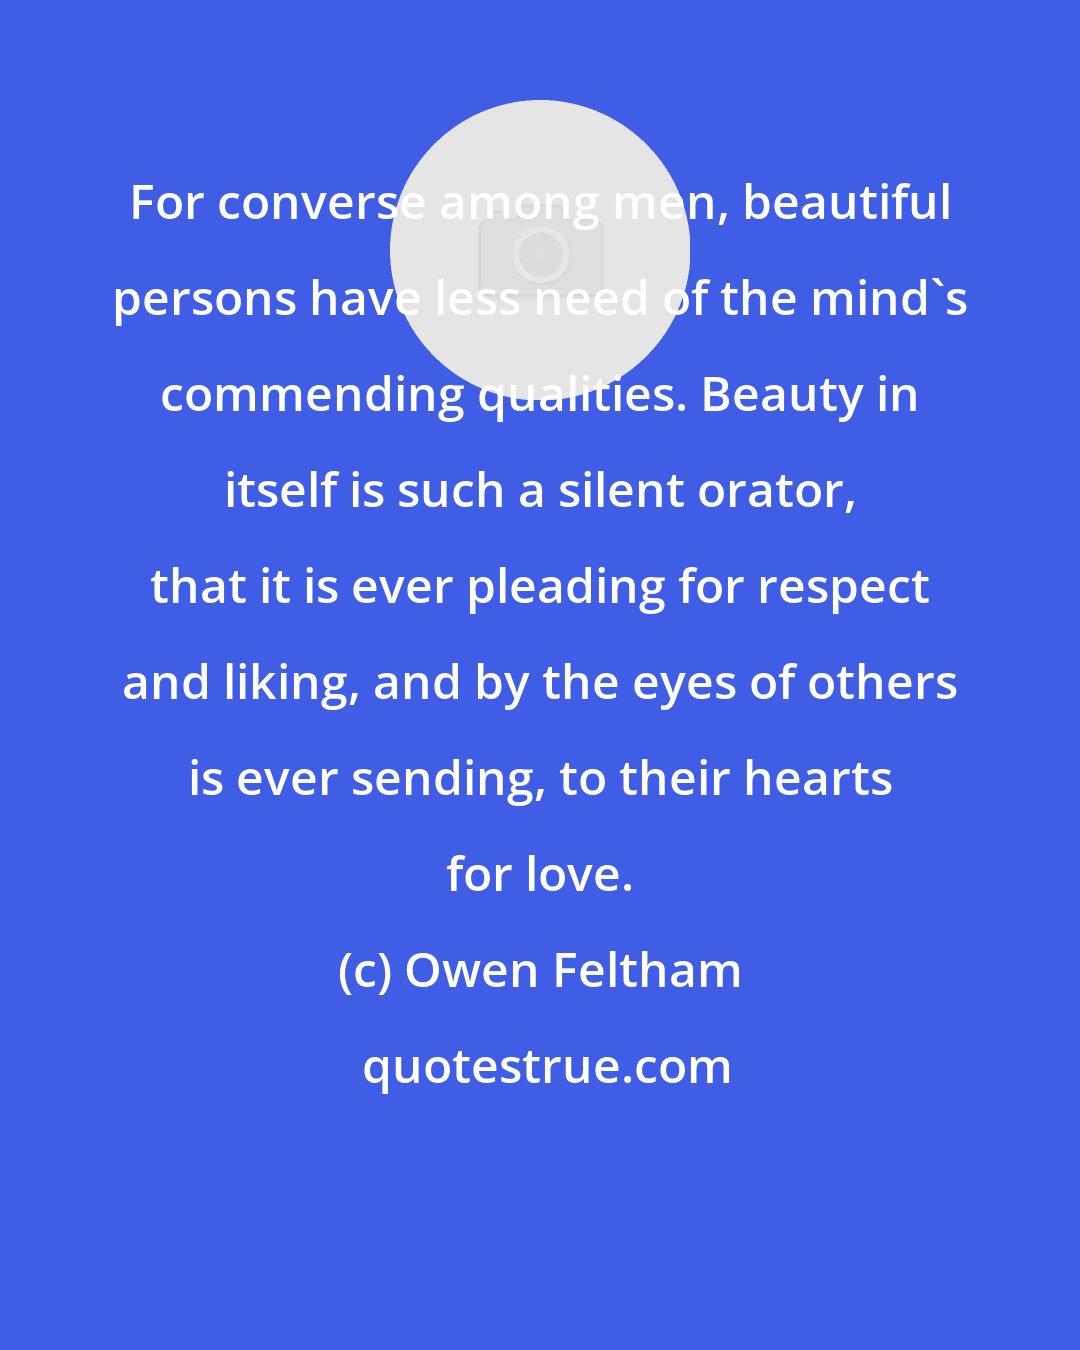 Owen Feltham: For converse among men, beautiful persons have less need of the mind's commending qualities. Beauty in itself is such a silent orator, that it is ever pleading for respect and liking, and by the eyes of others is ever sending, to their hearts for love.